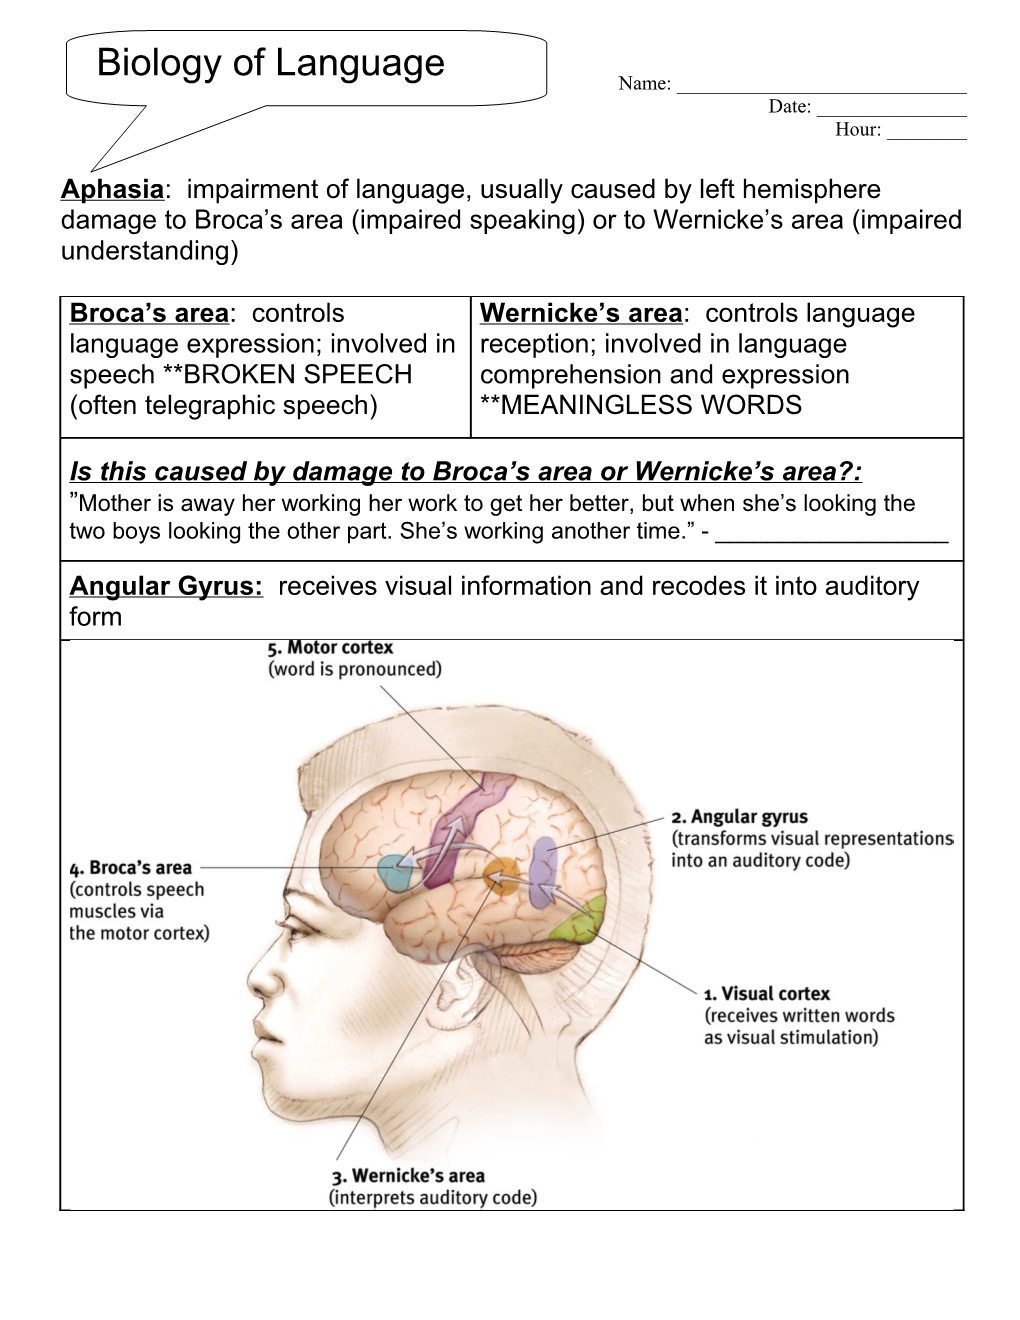 Aphasia: Impairment of Language, Usually Caused by Left Hemisphere Damage to Broca S Area